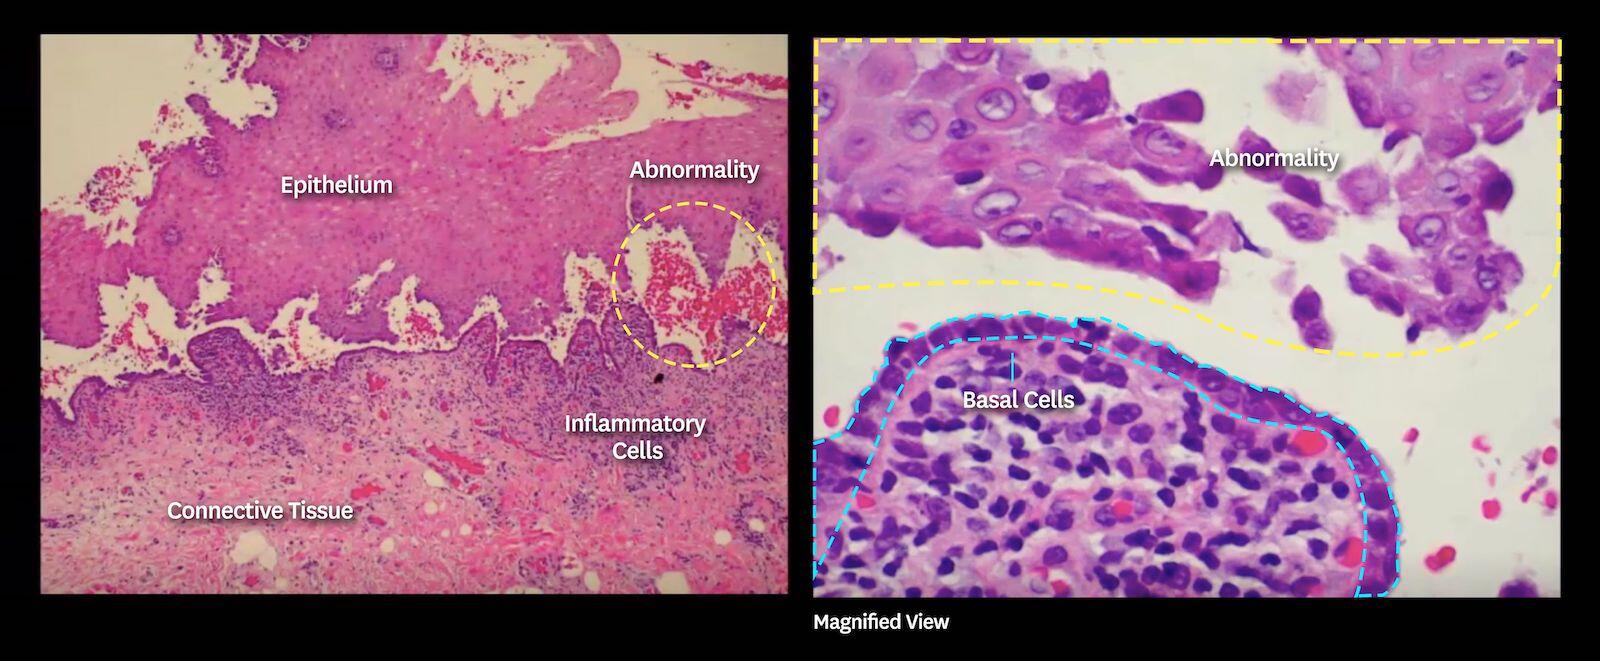 Pemphigus Vulgaris histology picture with annotations.